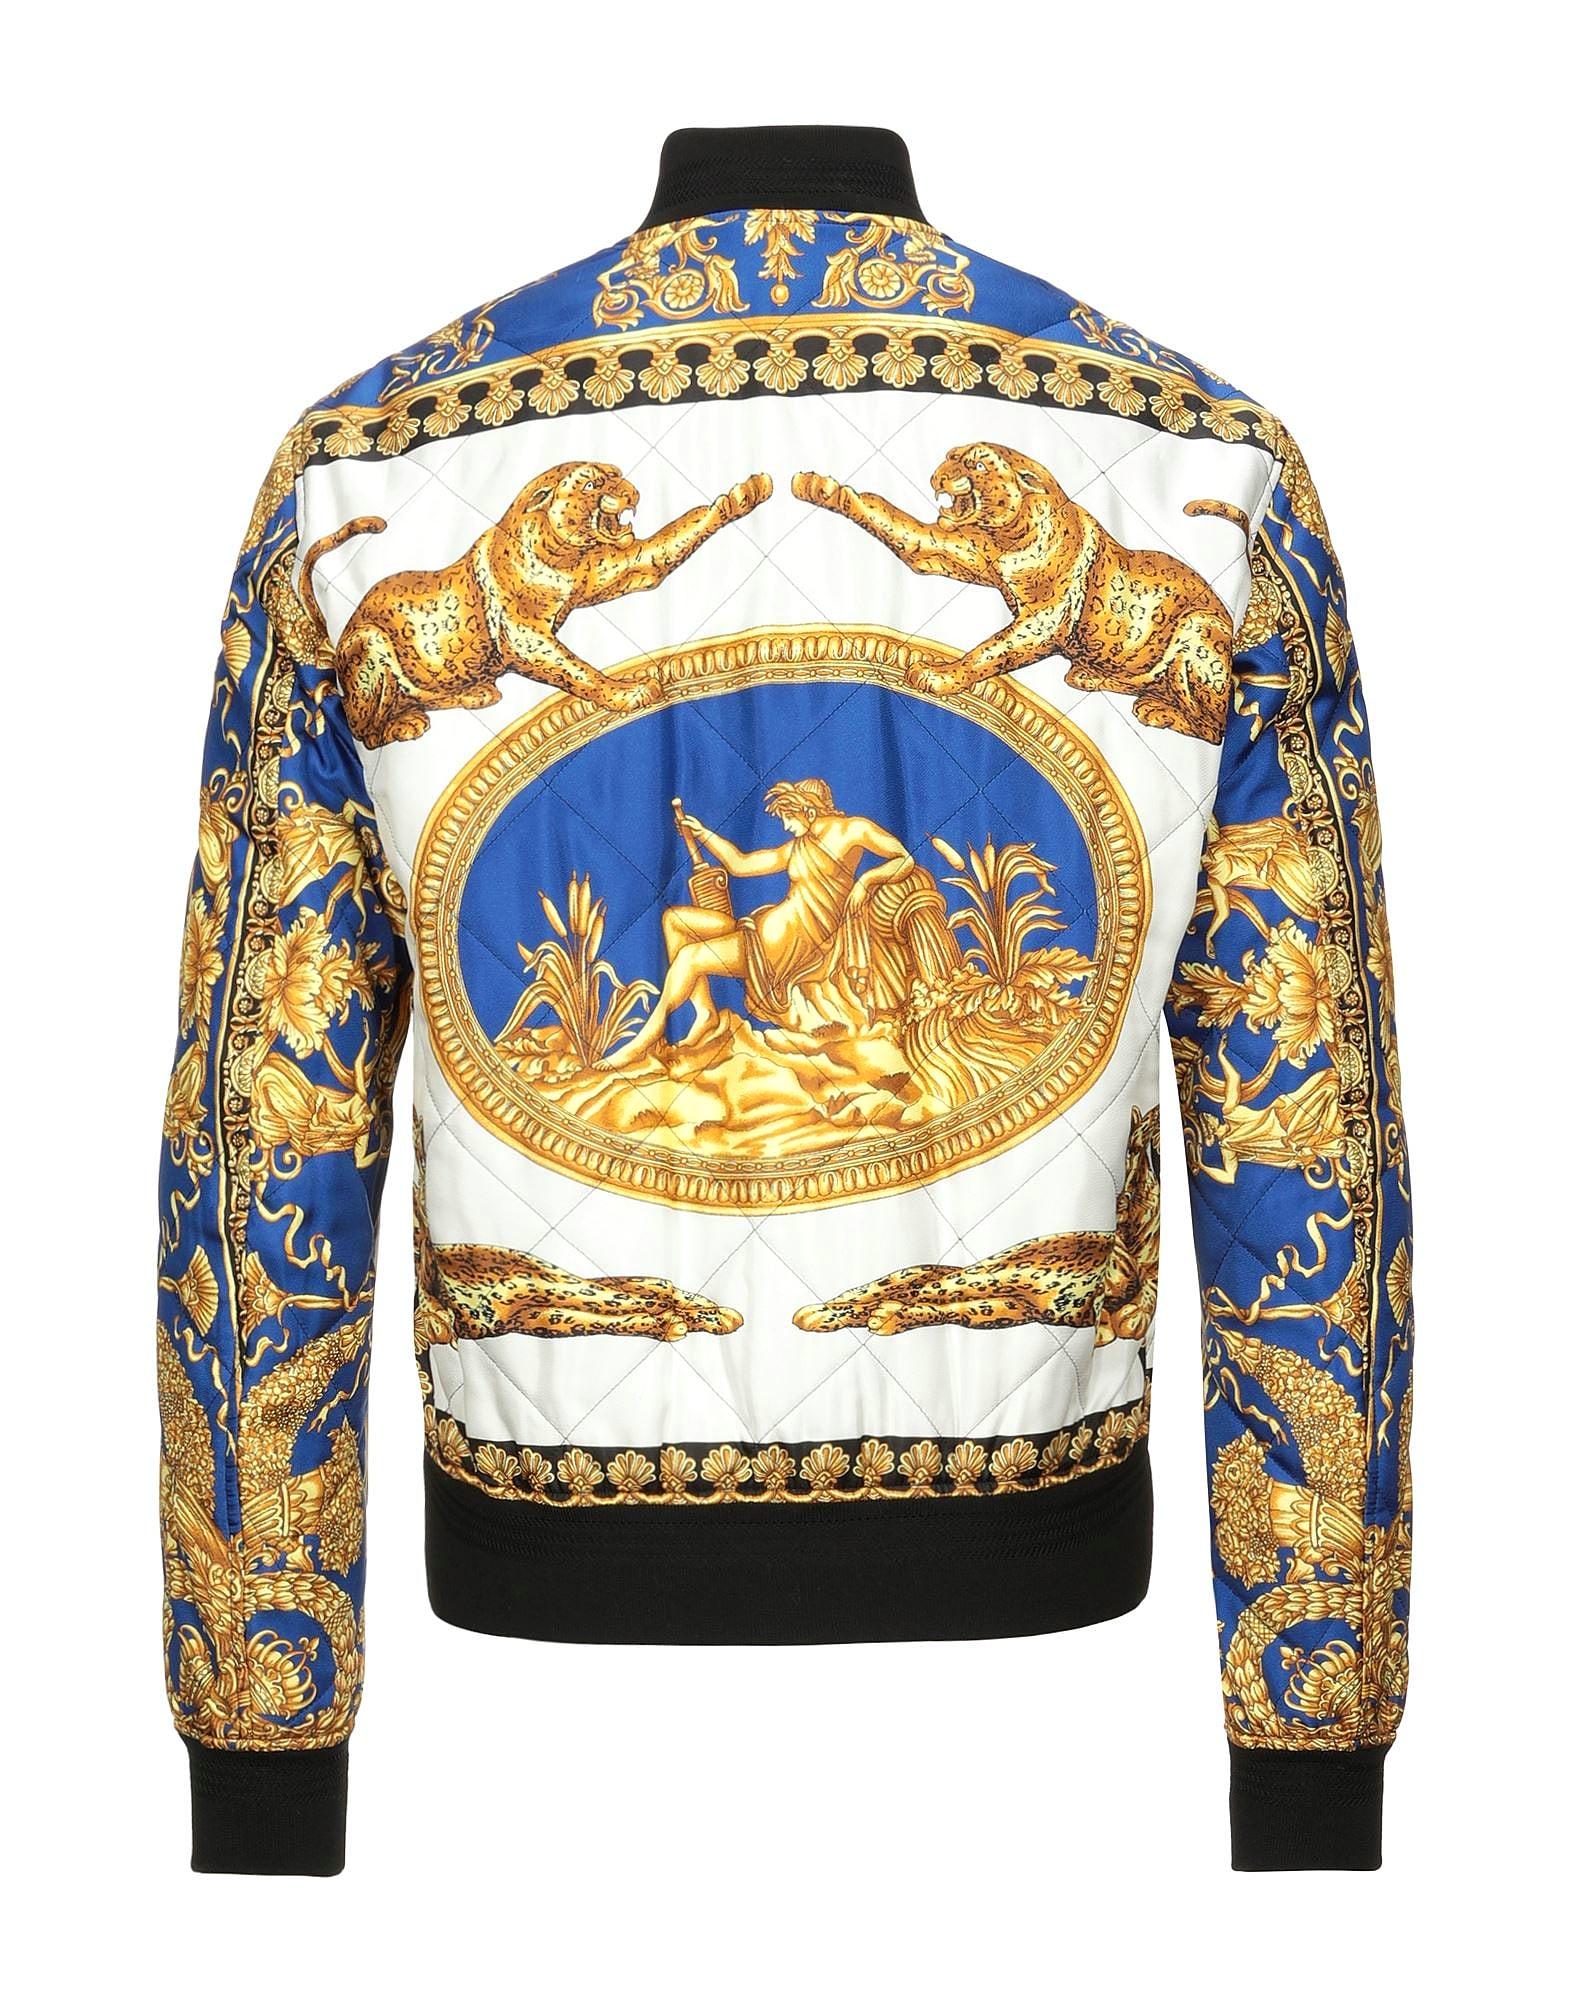 VERSACE  

Twill, quilted, no appliqués, 
designer's motif, single-breasted , 
zipper closure, round collar, multipockets, 
long sleeves,
 internal padding

Content: 100% Silk, Cotton, Elastane  

Italian size is 46- US M

Length 26.91 inches


Made